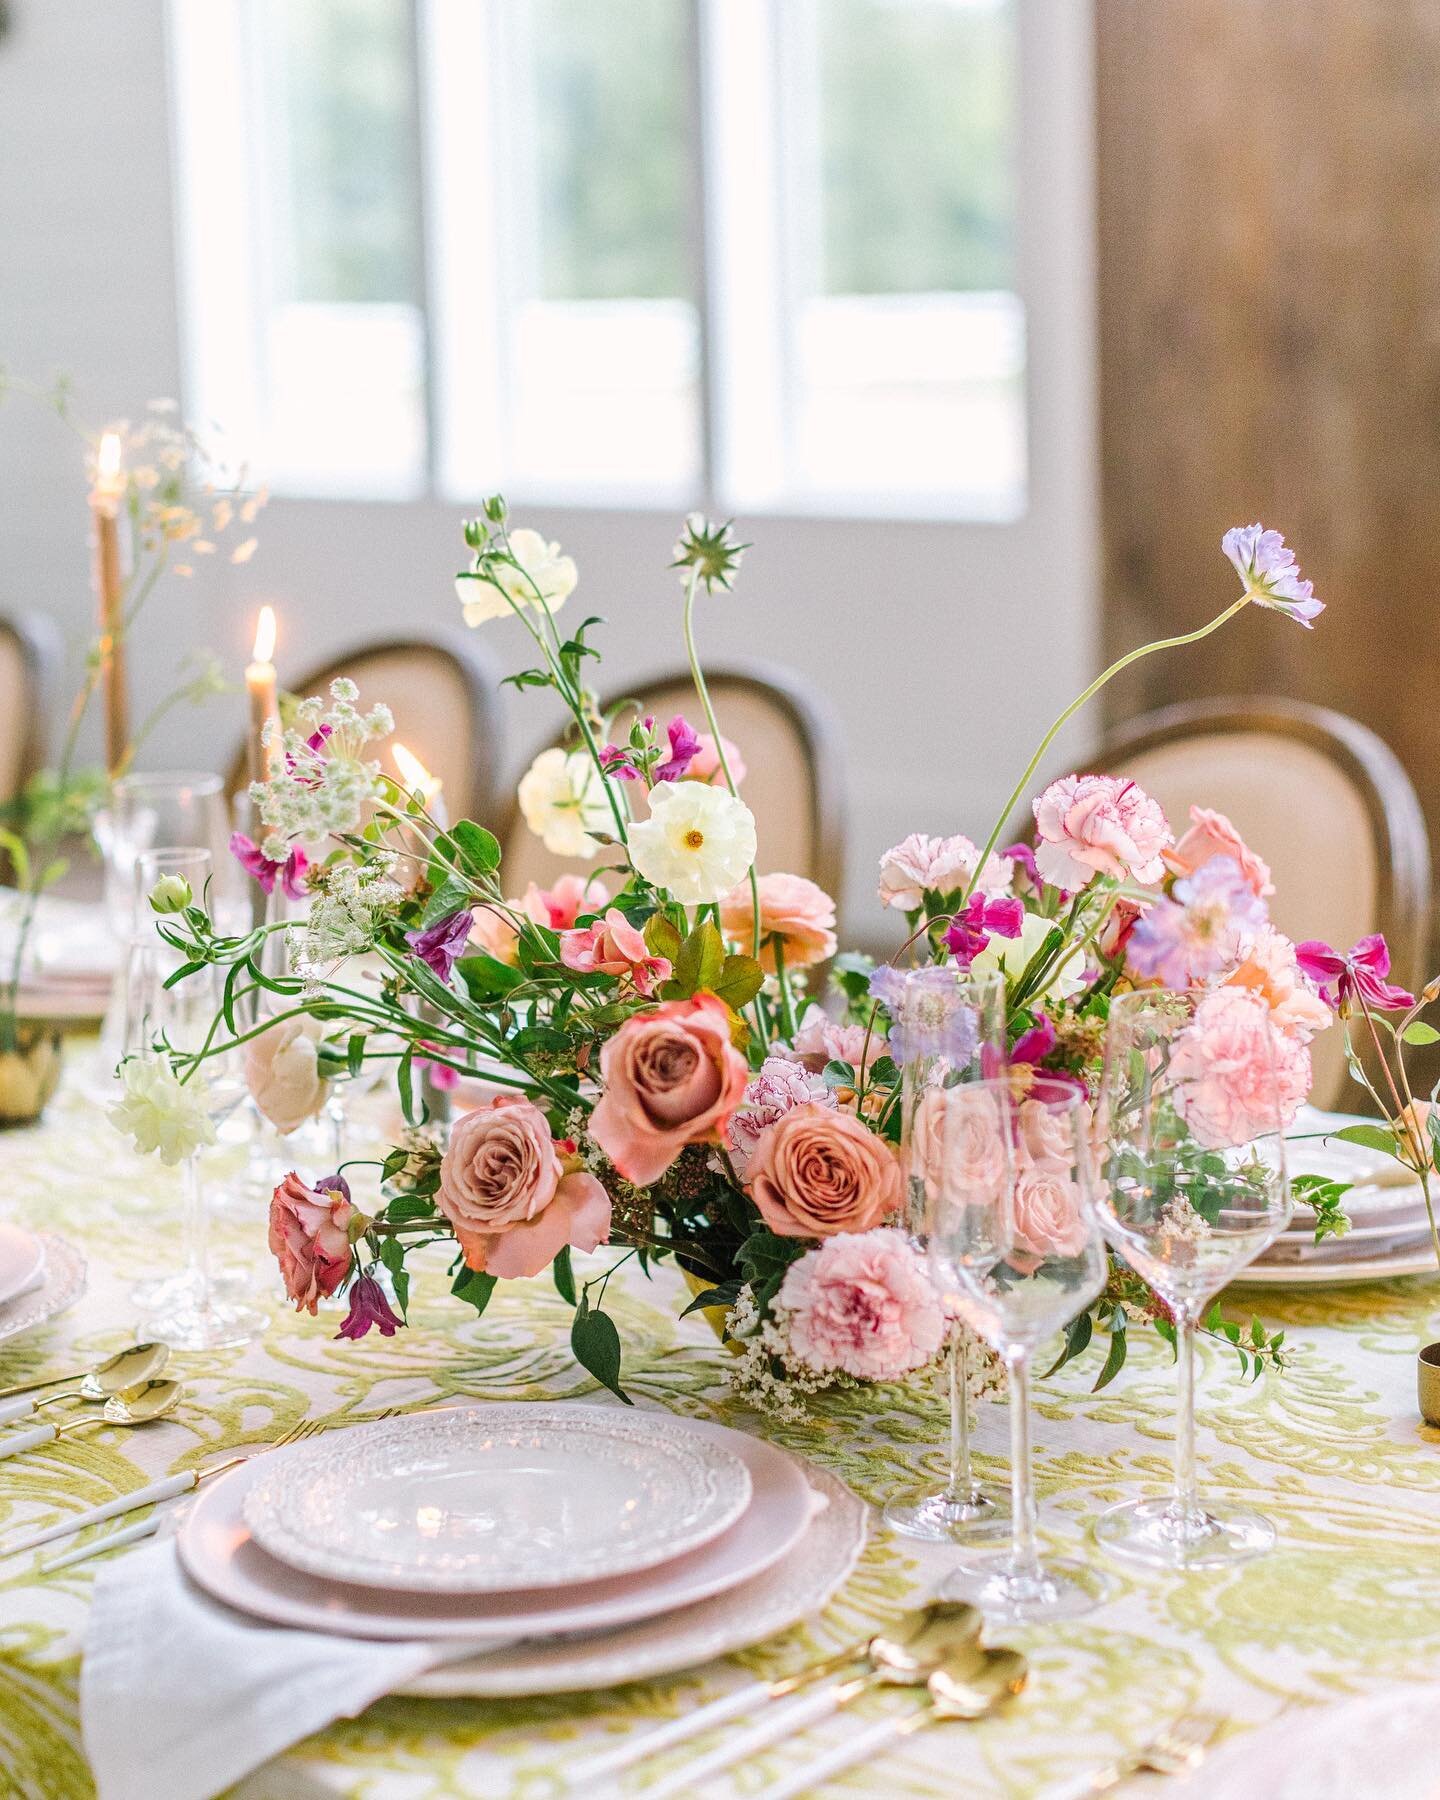 The danciest tabletop from this time last year with @alloraandivy and friends 💫

Photography: @ellenashton
Planning + Design: @alloraandivy
Venue: @thefrenchfarmhousevenue
Floral: @slowdarling
MUAH: @themeaganstarr
Cake: @xo_cakery
Rentals: @bellaac